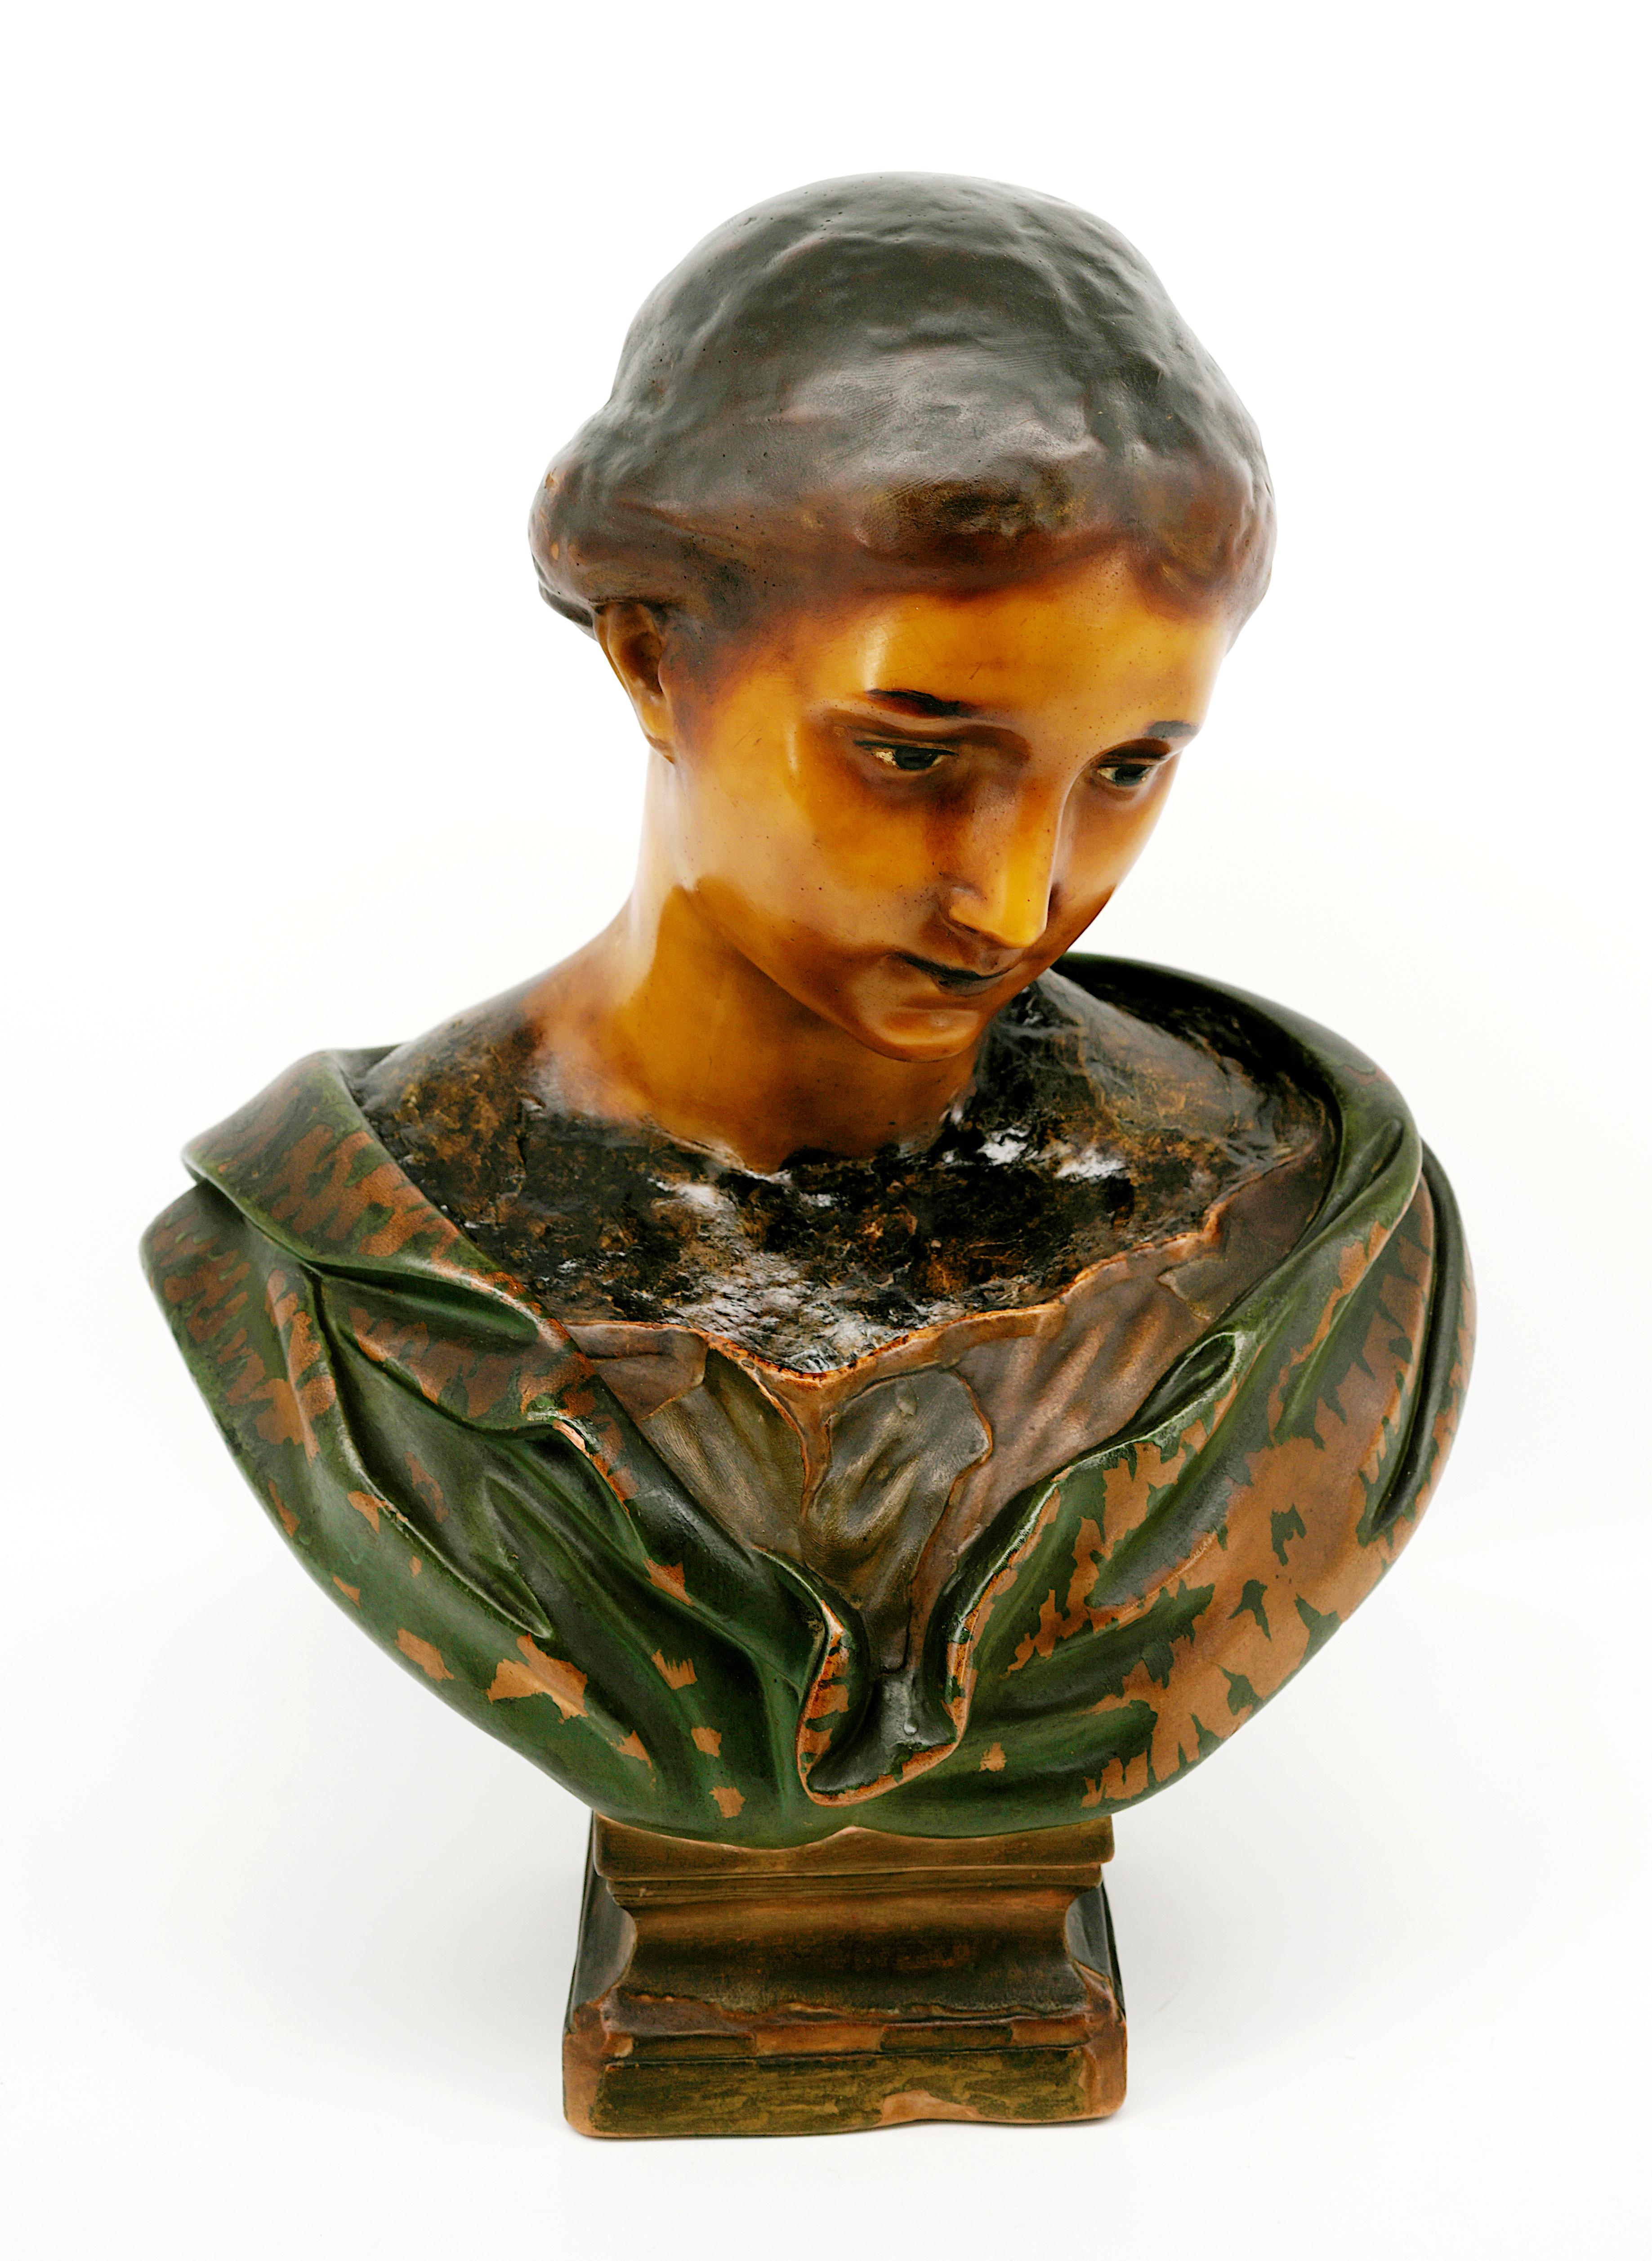 French Art Nouveau Wax Young Girl Bust Sculpture, ca.1900 In Excellent Condition For Sale In Saint-Amans-des-Cots, FR